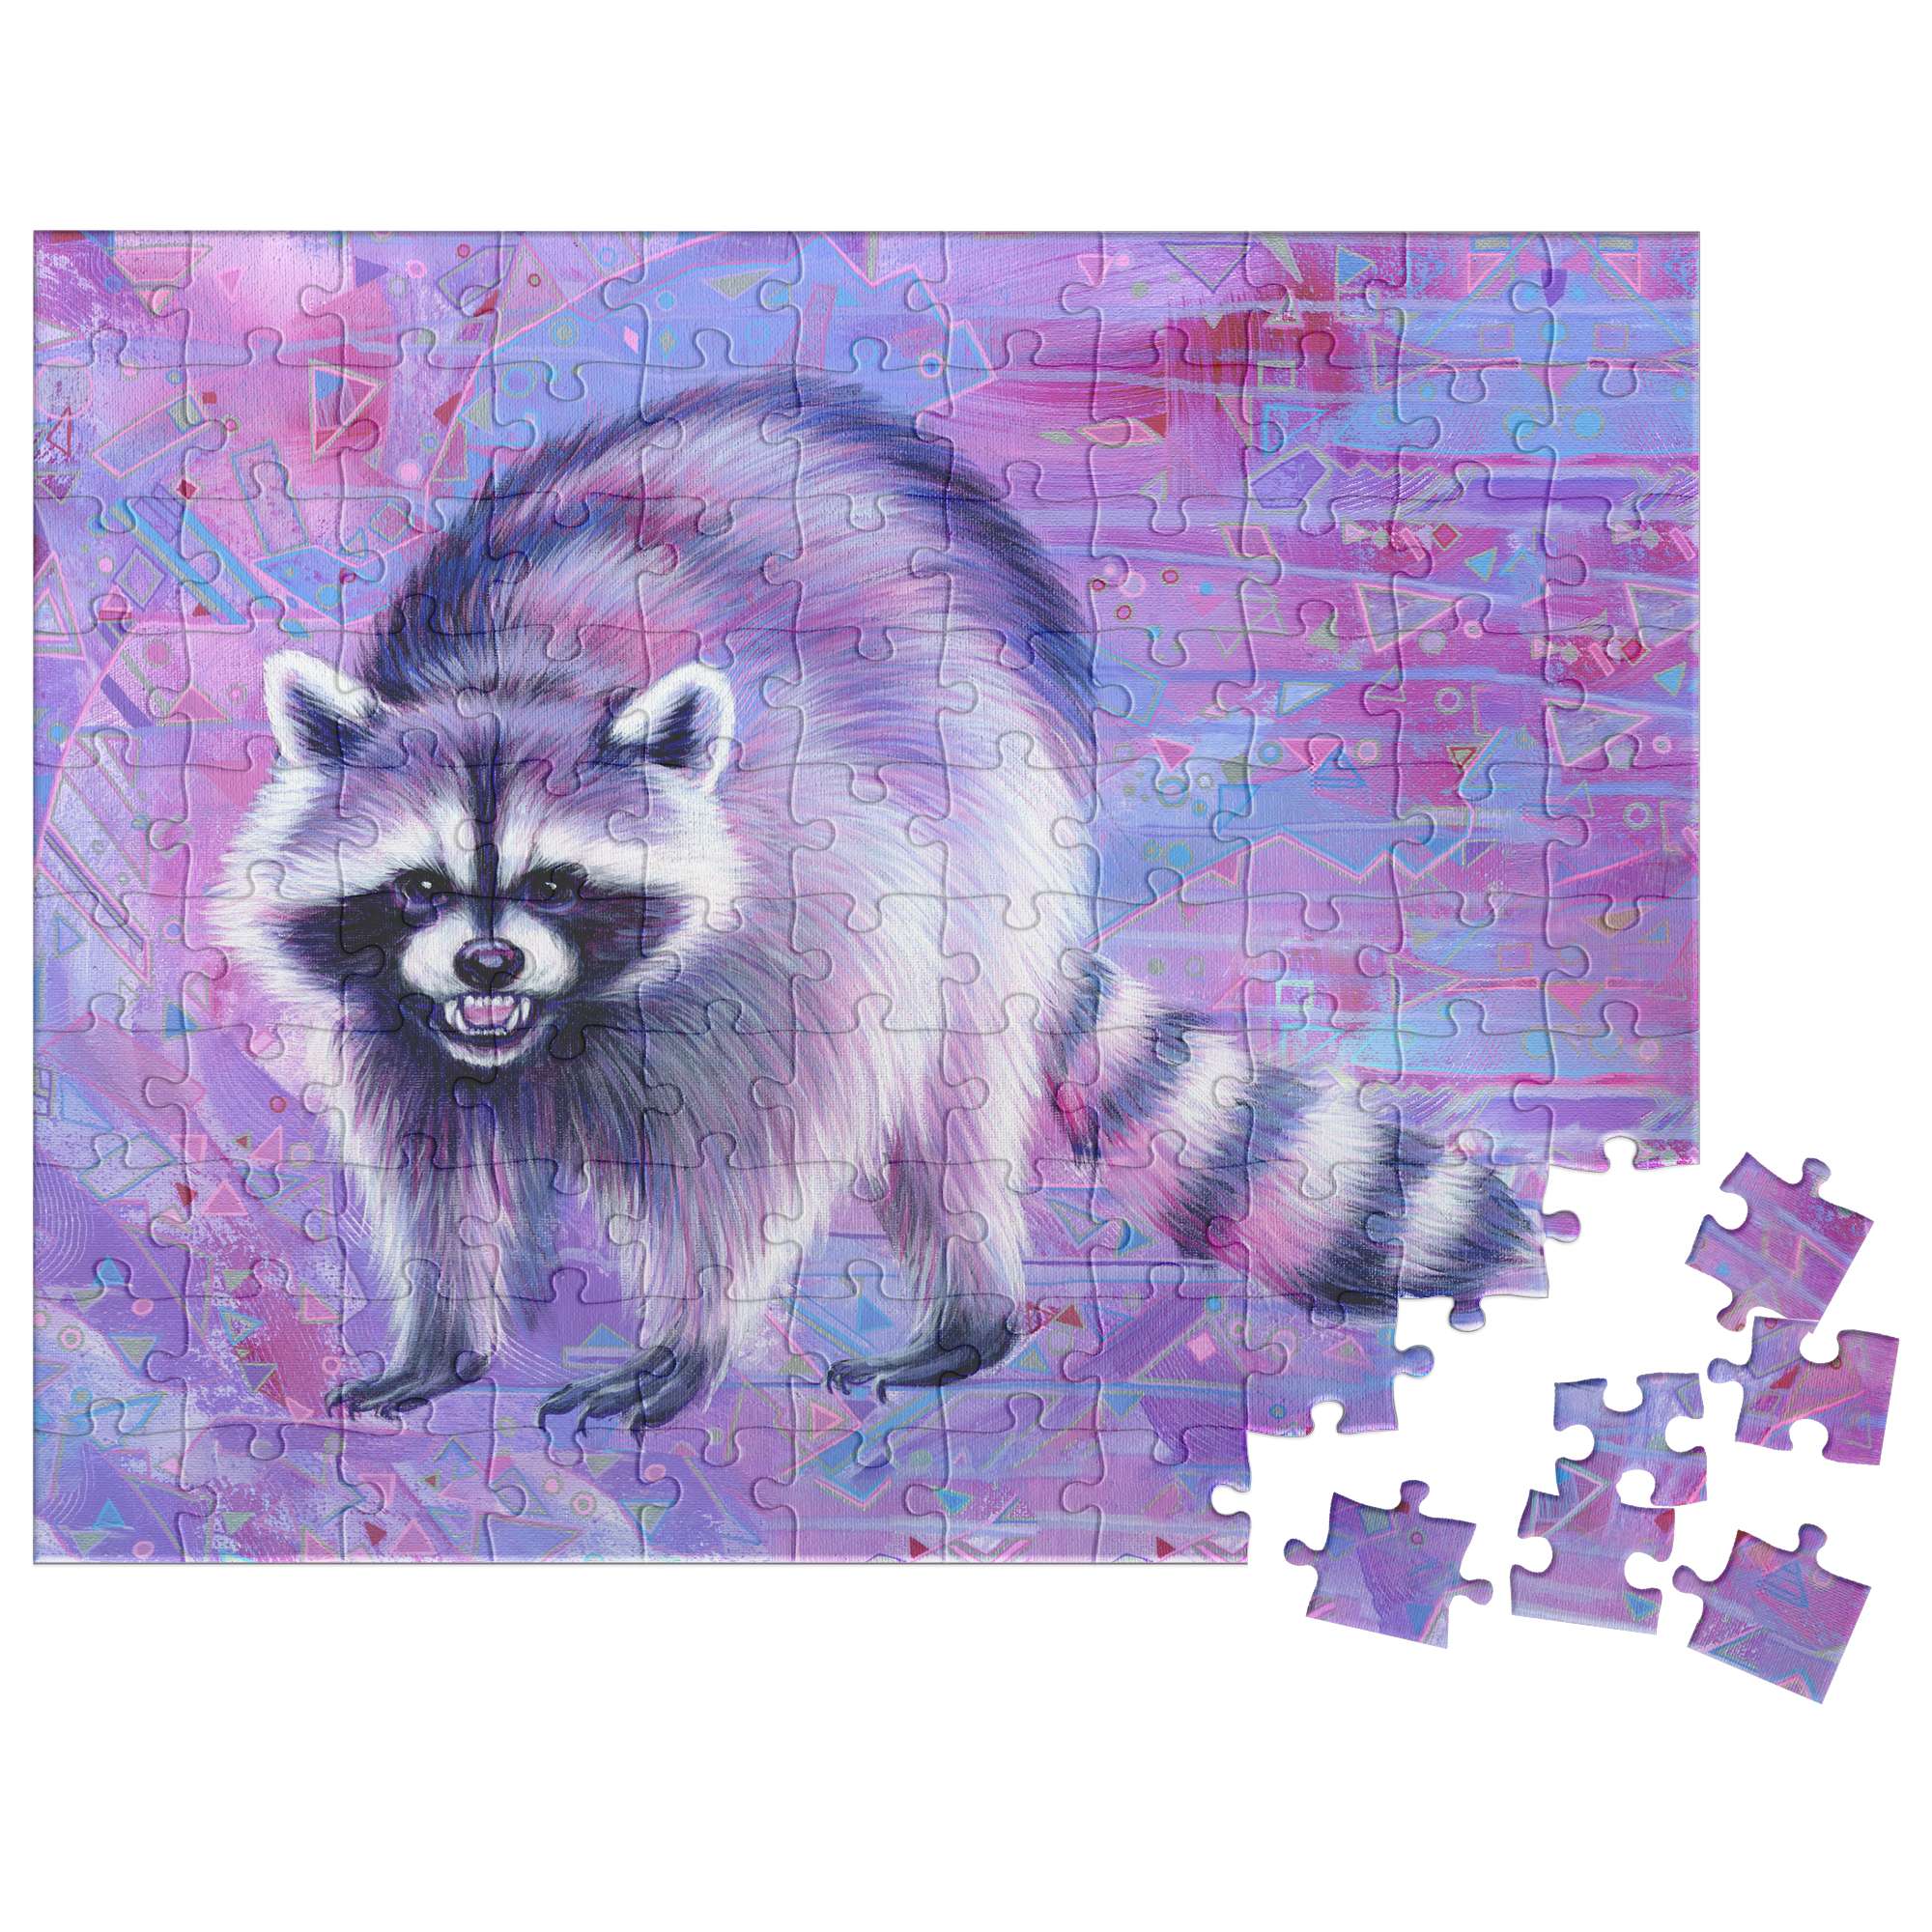 A nearly completed Raccoon Puzzle, with a few pieces detached, set against a vibrant purple background.